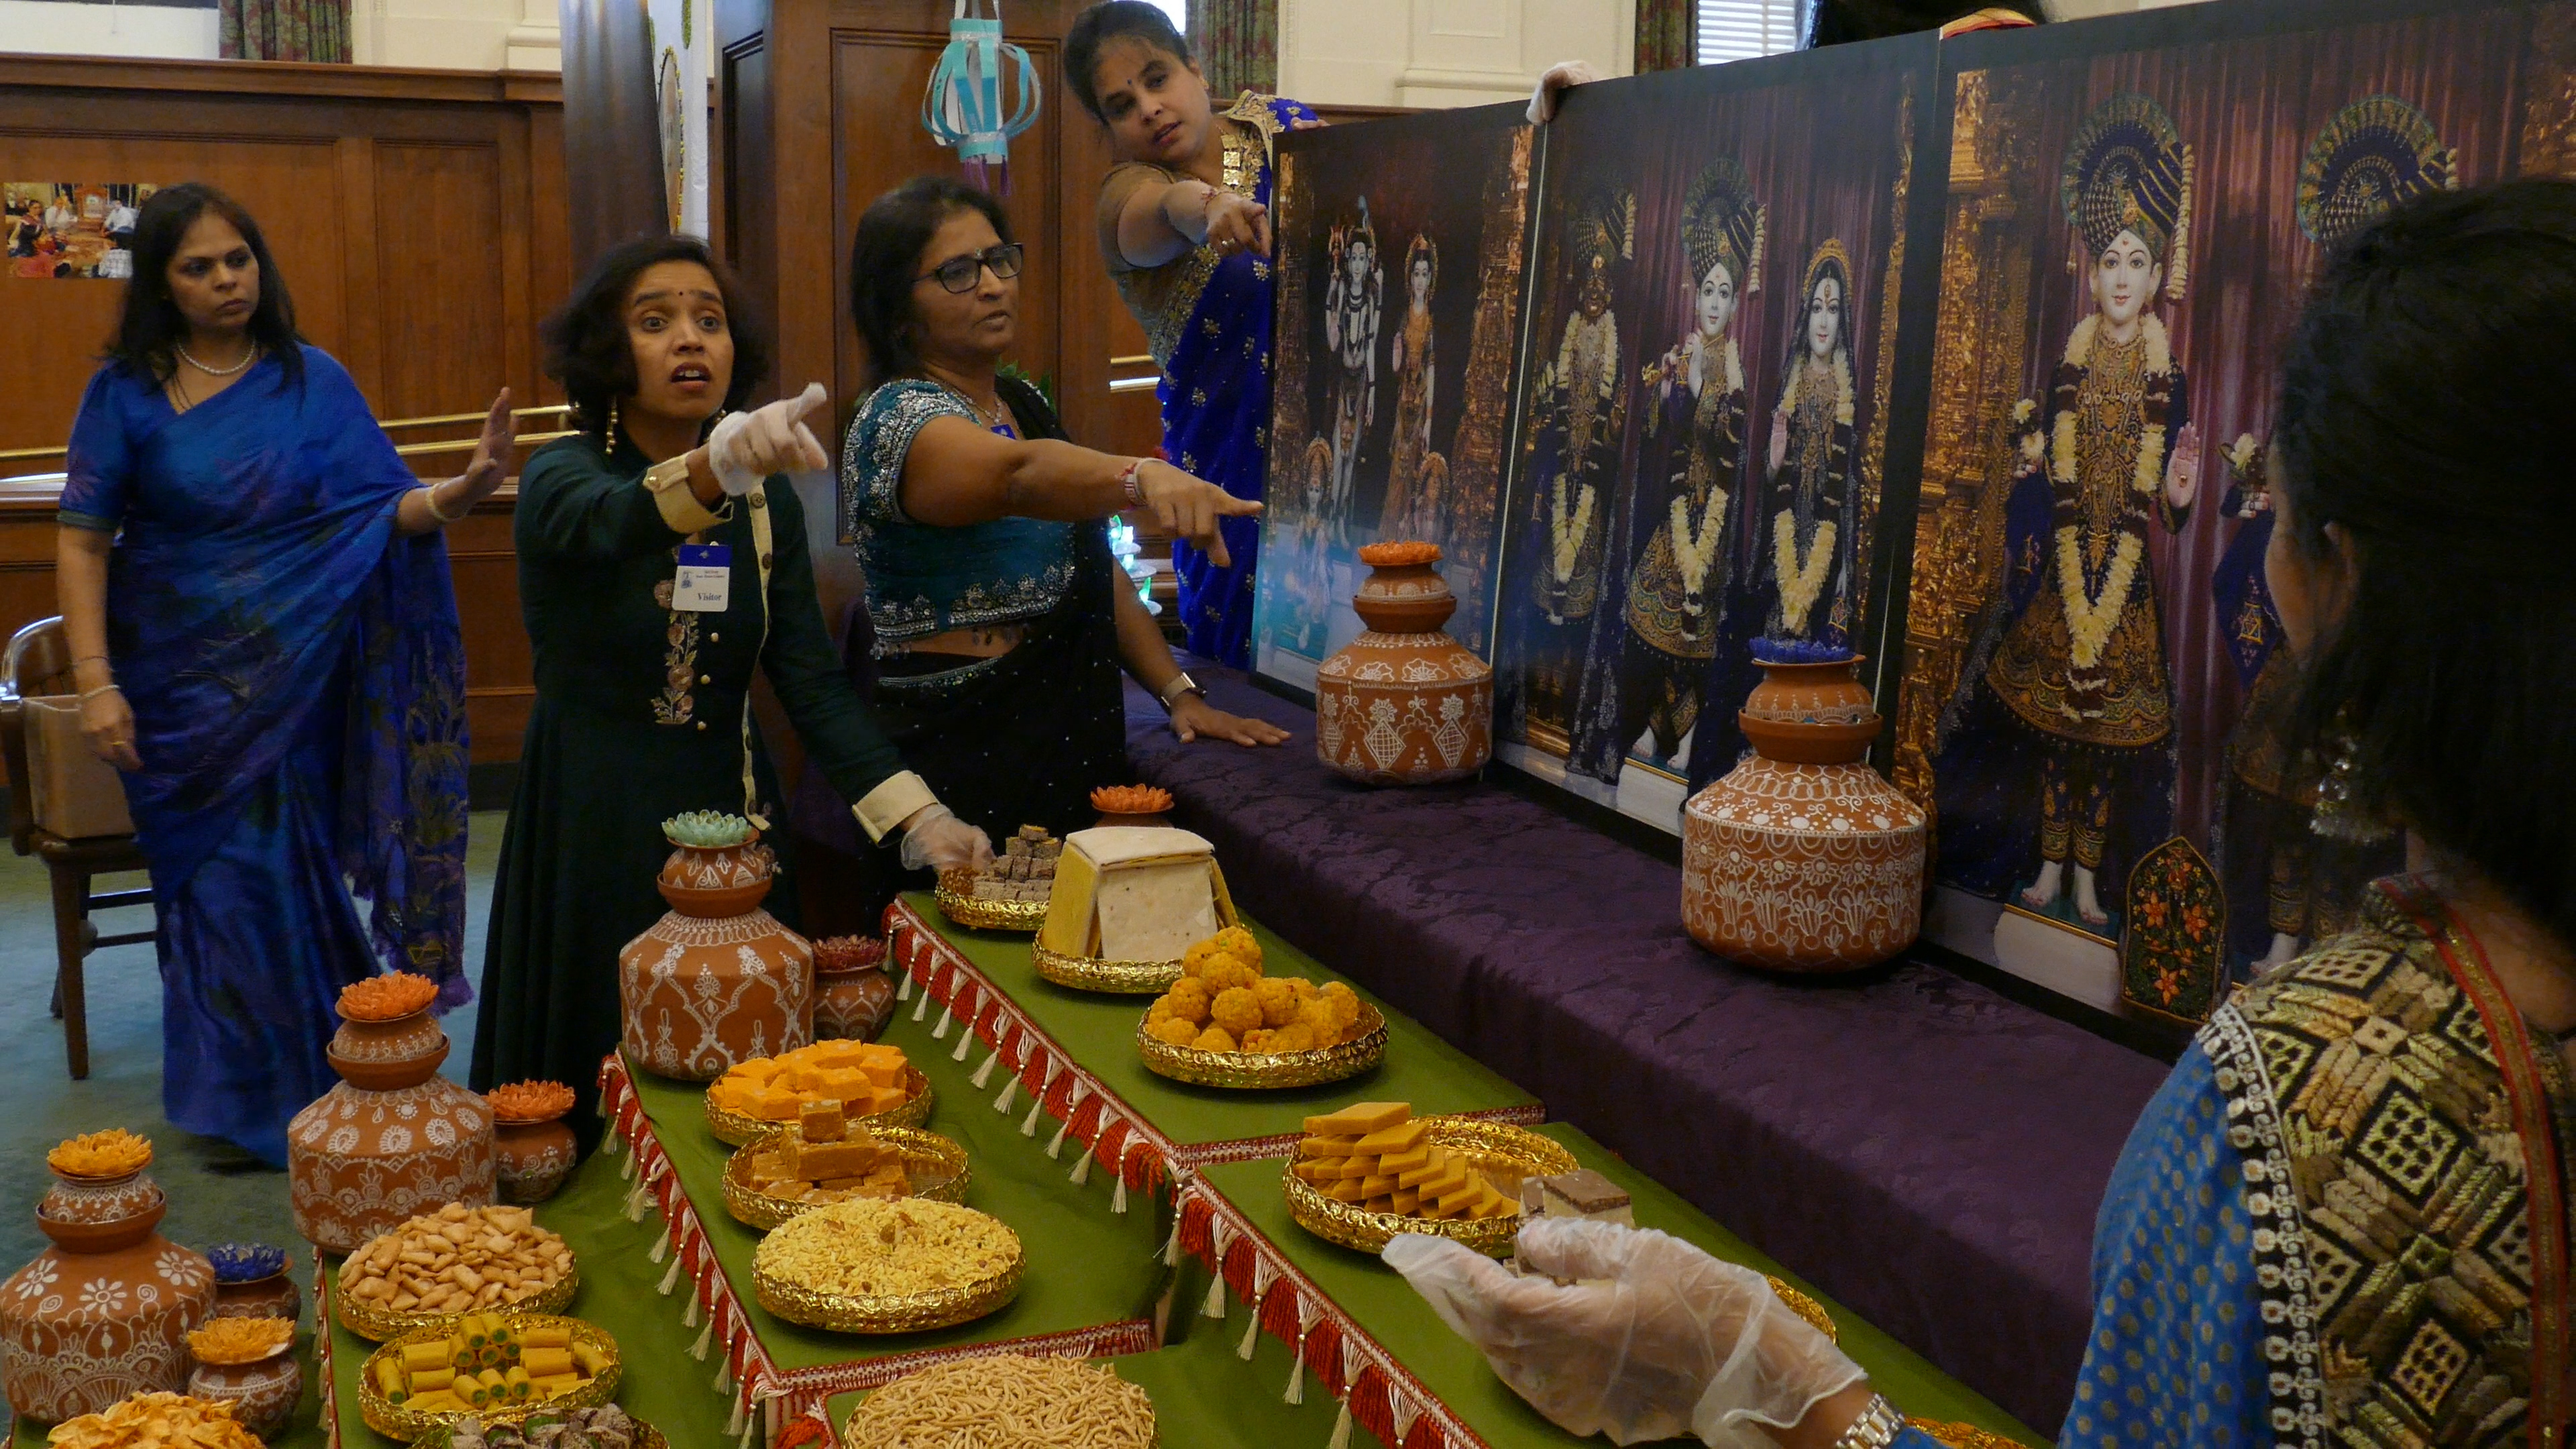 Thursday, November 7, 2019 -  Annakut (Mountain of Food) set up in NJ State House for Diwali. The annakut, one of the significant aspects of Diwali, is an annual offering to God to ask for a propserous and positive new year. The annakut was put up in the State House to honor the Diwali festival and celebrate  diversity in NJ, according to Darshan Patel, representative of BAPS Shri Swaminarayan Mandir, Robbinsville, which hosted the event.